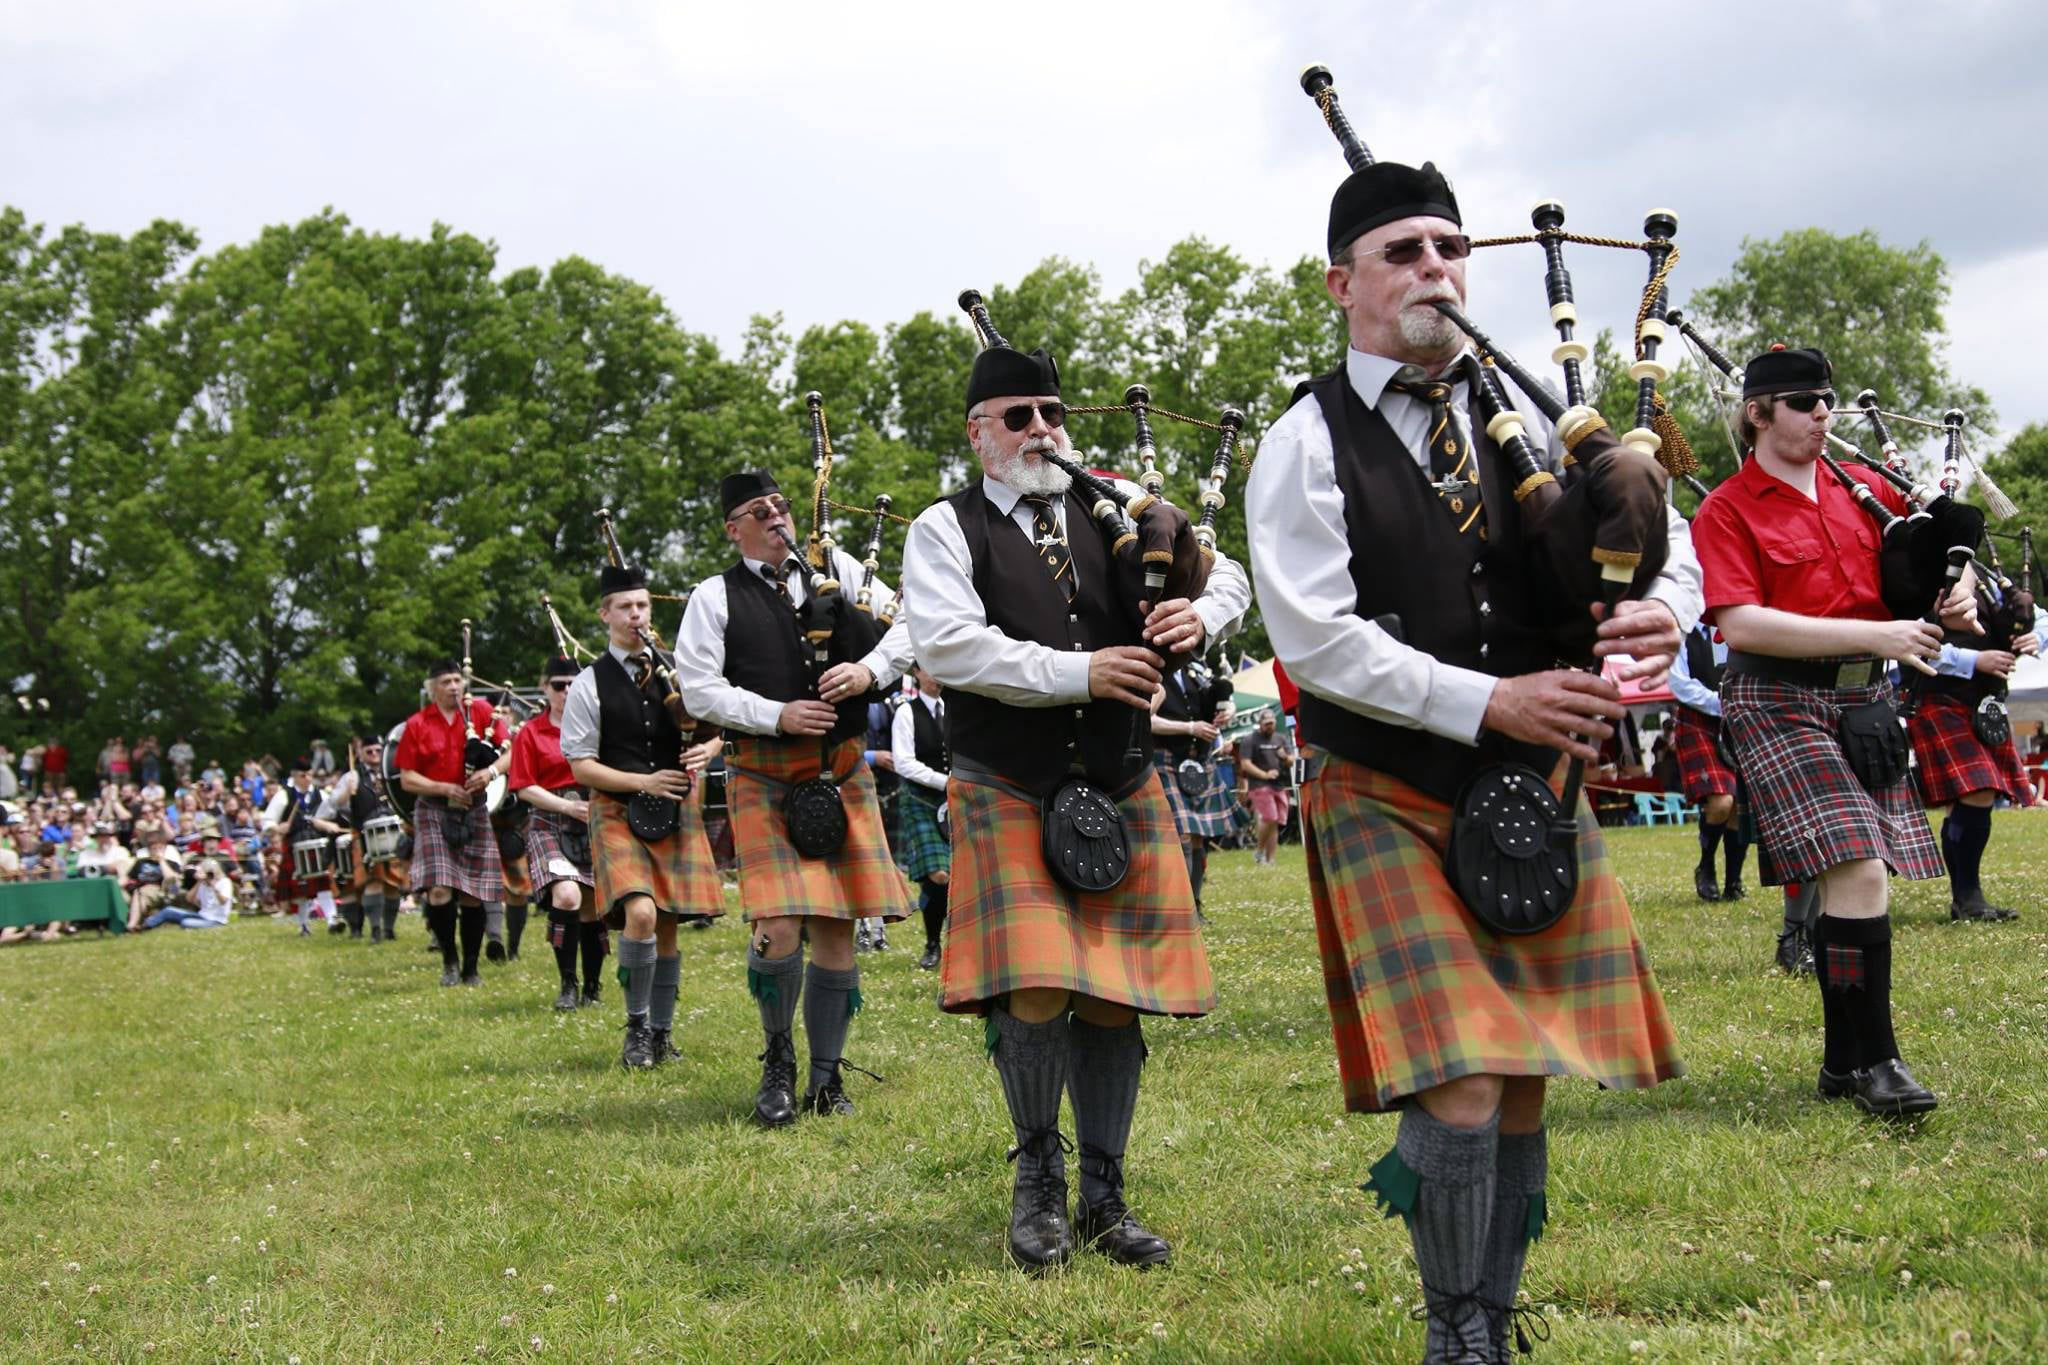 41st Annual Smoky Mountain Scottish Festival and Games coming to Townsend